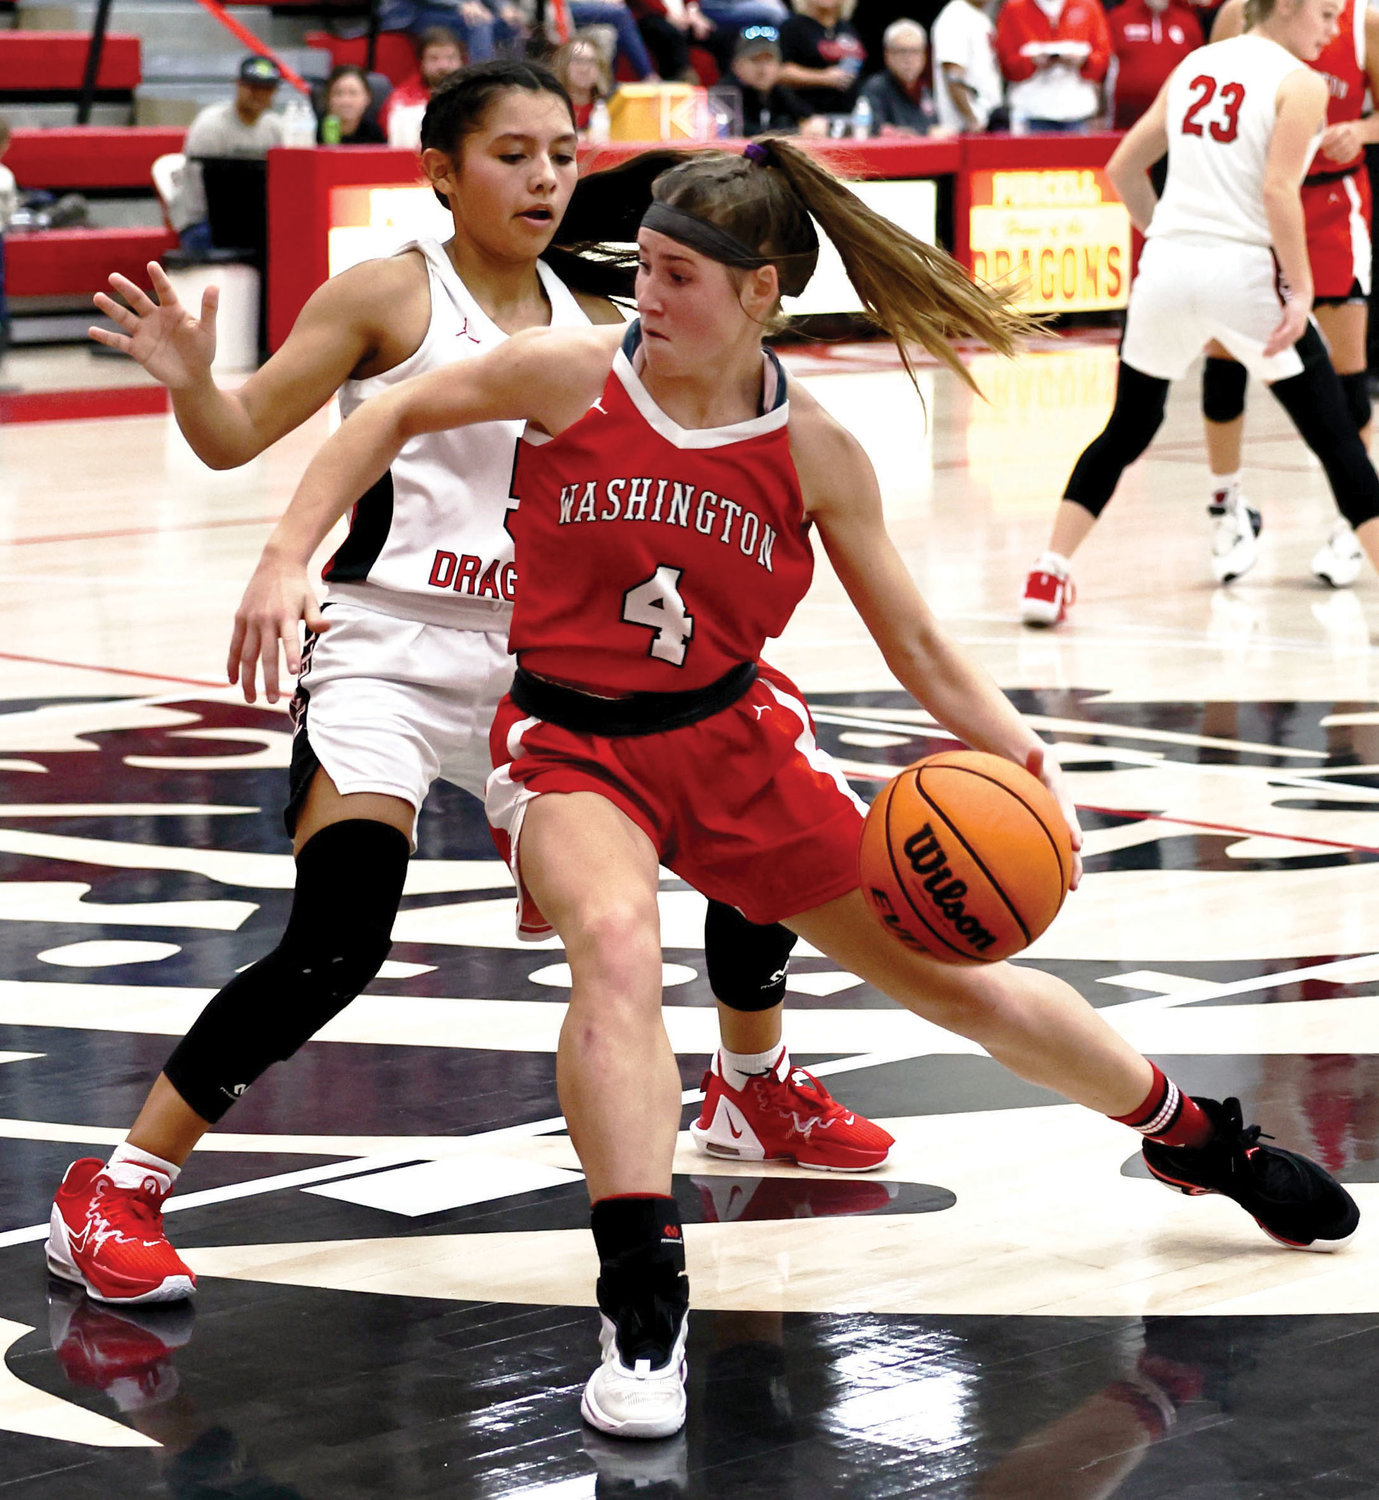 Washington sophomore Rielyn Scheffe dribbles toward the basket against Purcell. The Warriors defeated the Dragons 59-54.